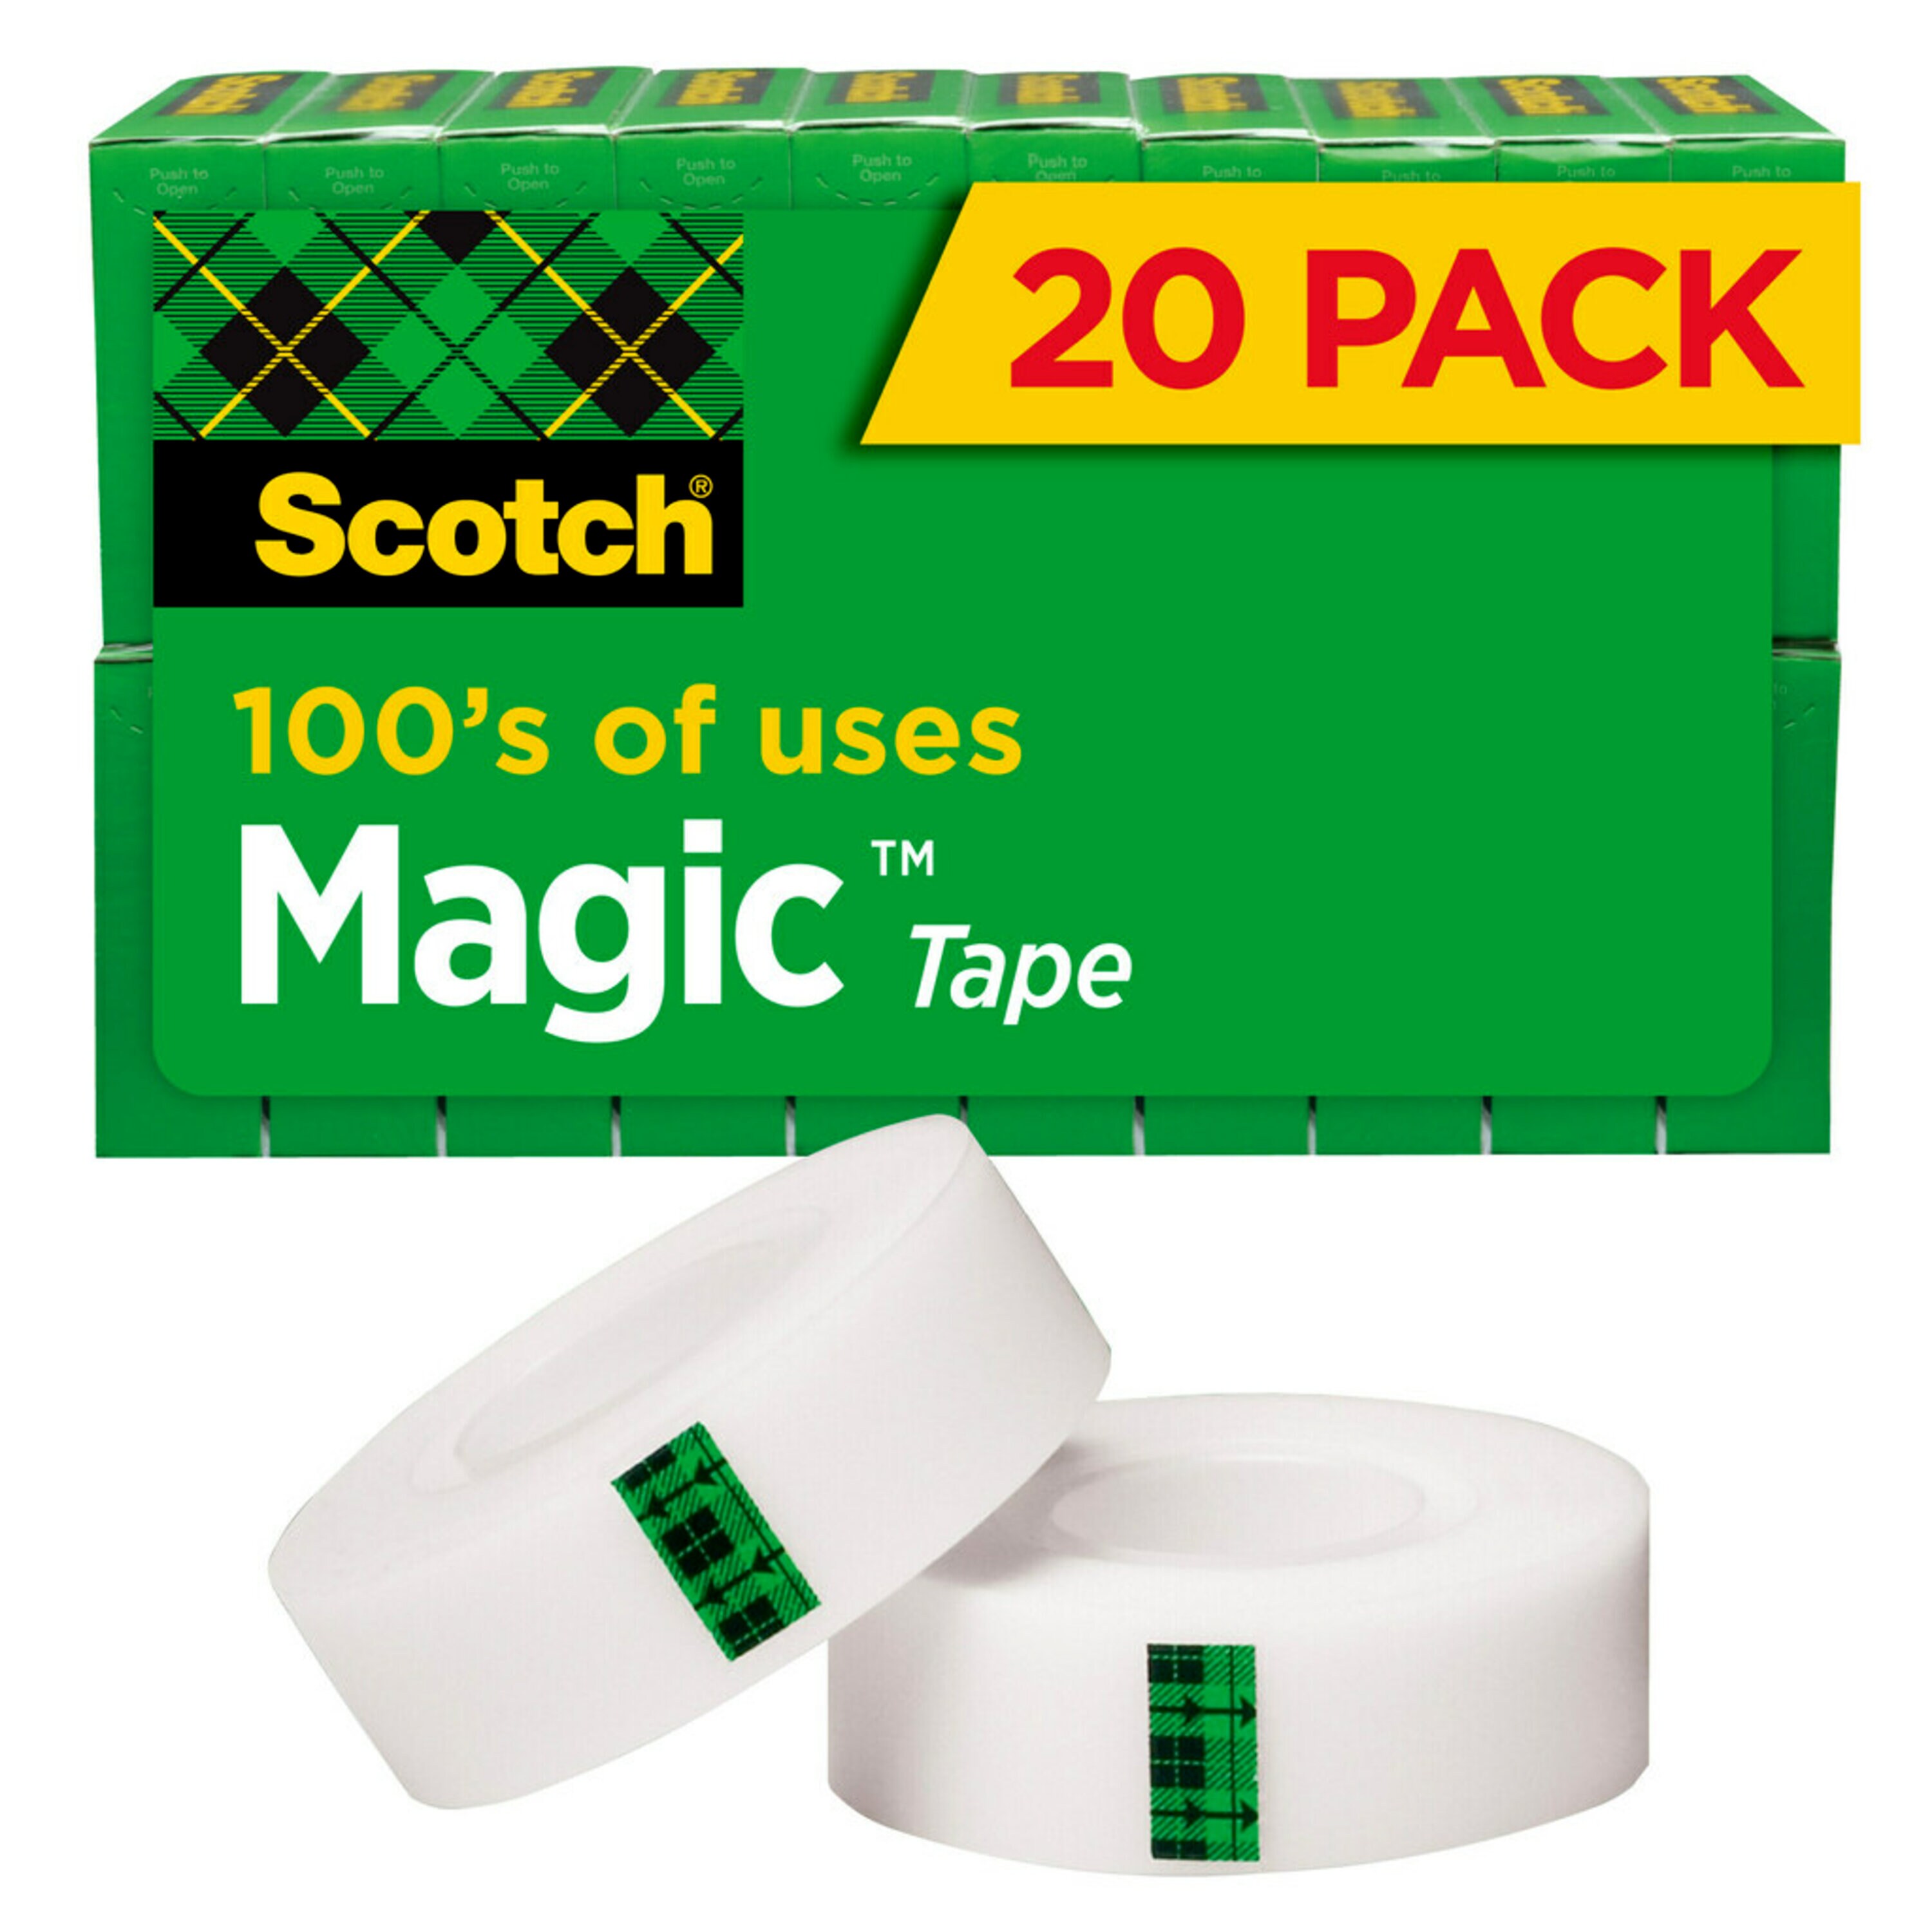 Scotch Magic Tape, Invisible, 20 Tape Rolls - image 1 of 18